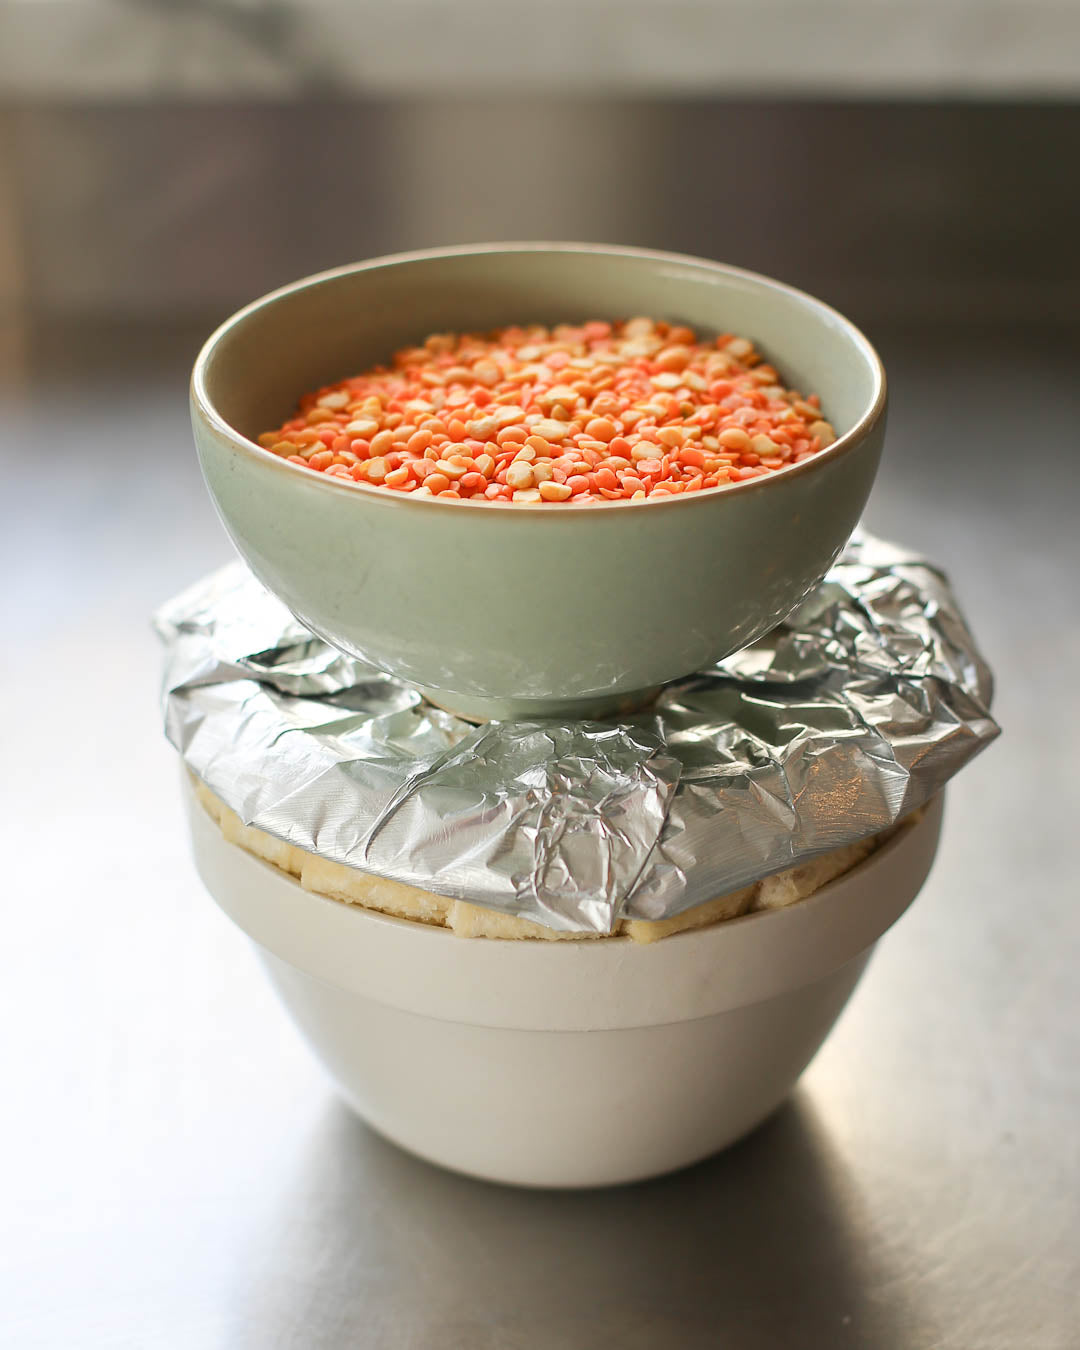 Image shows the filled bread basin, covered with foil and a bowl of red lentils acting a a pastry weight on top.  This is how it should go into the oven to cook.